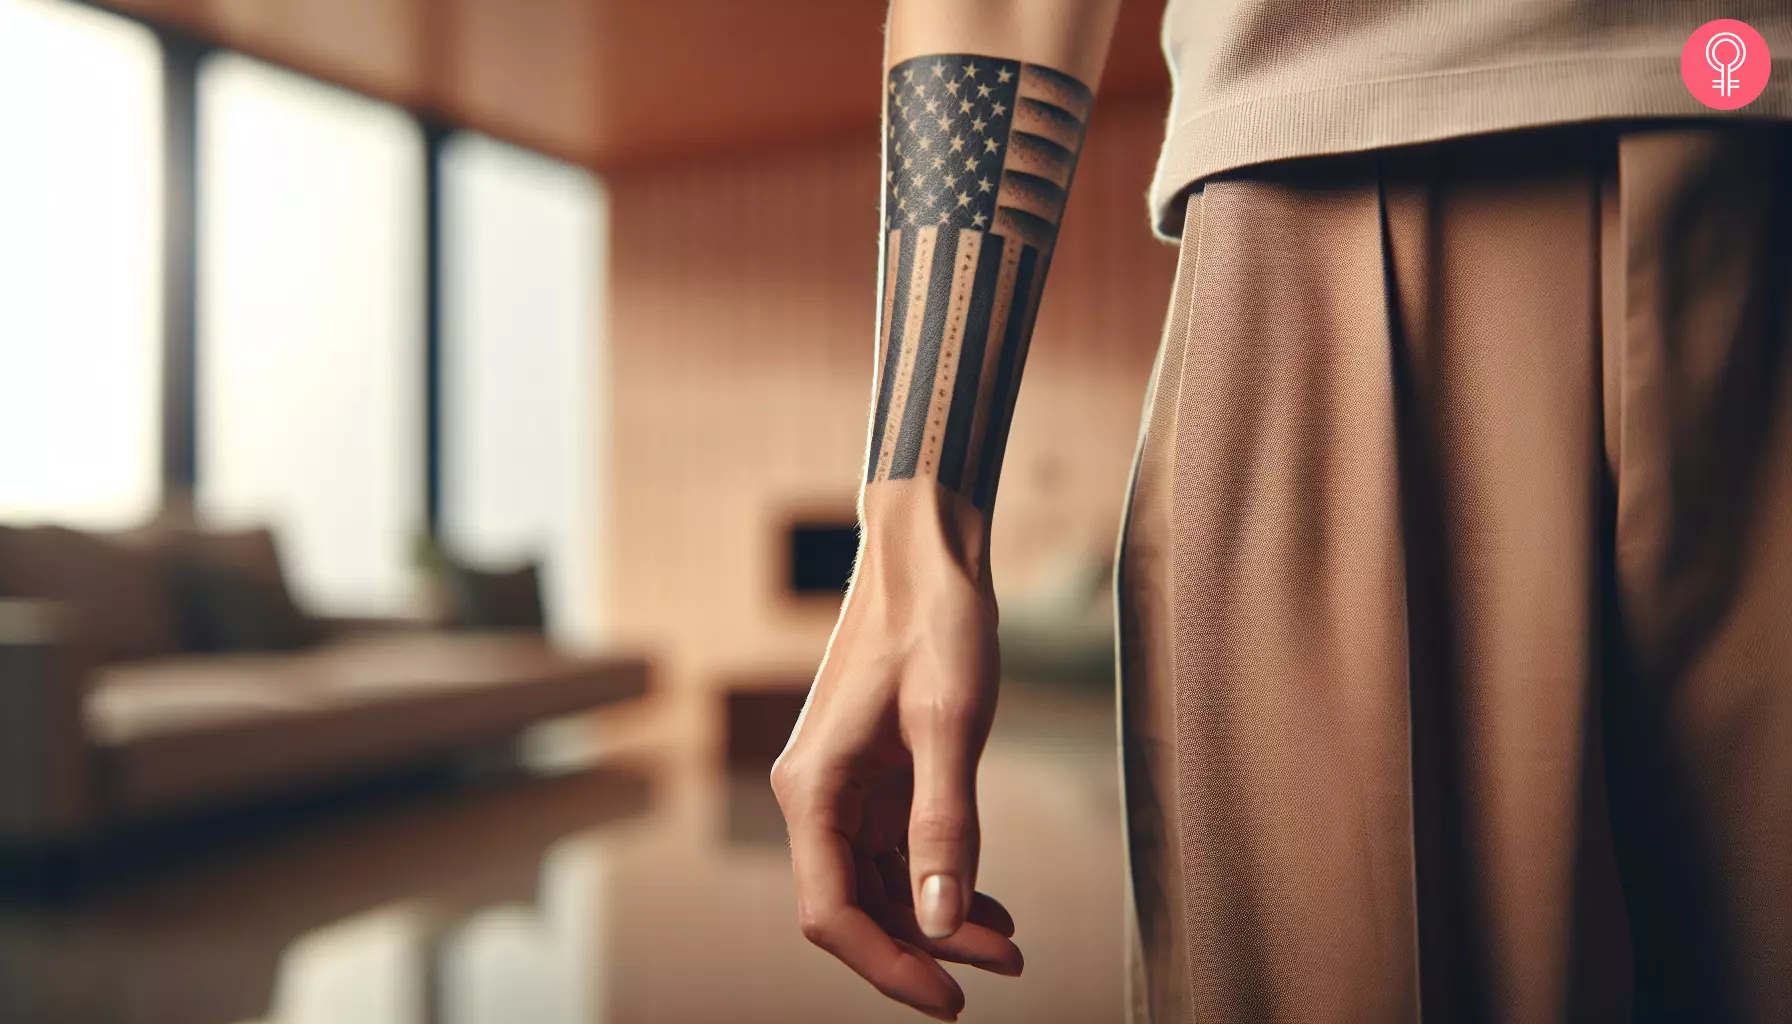 A black American flag tattoo design on the forearm of a woman